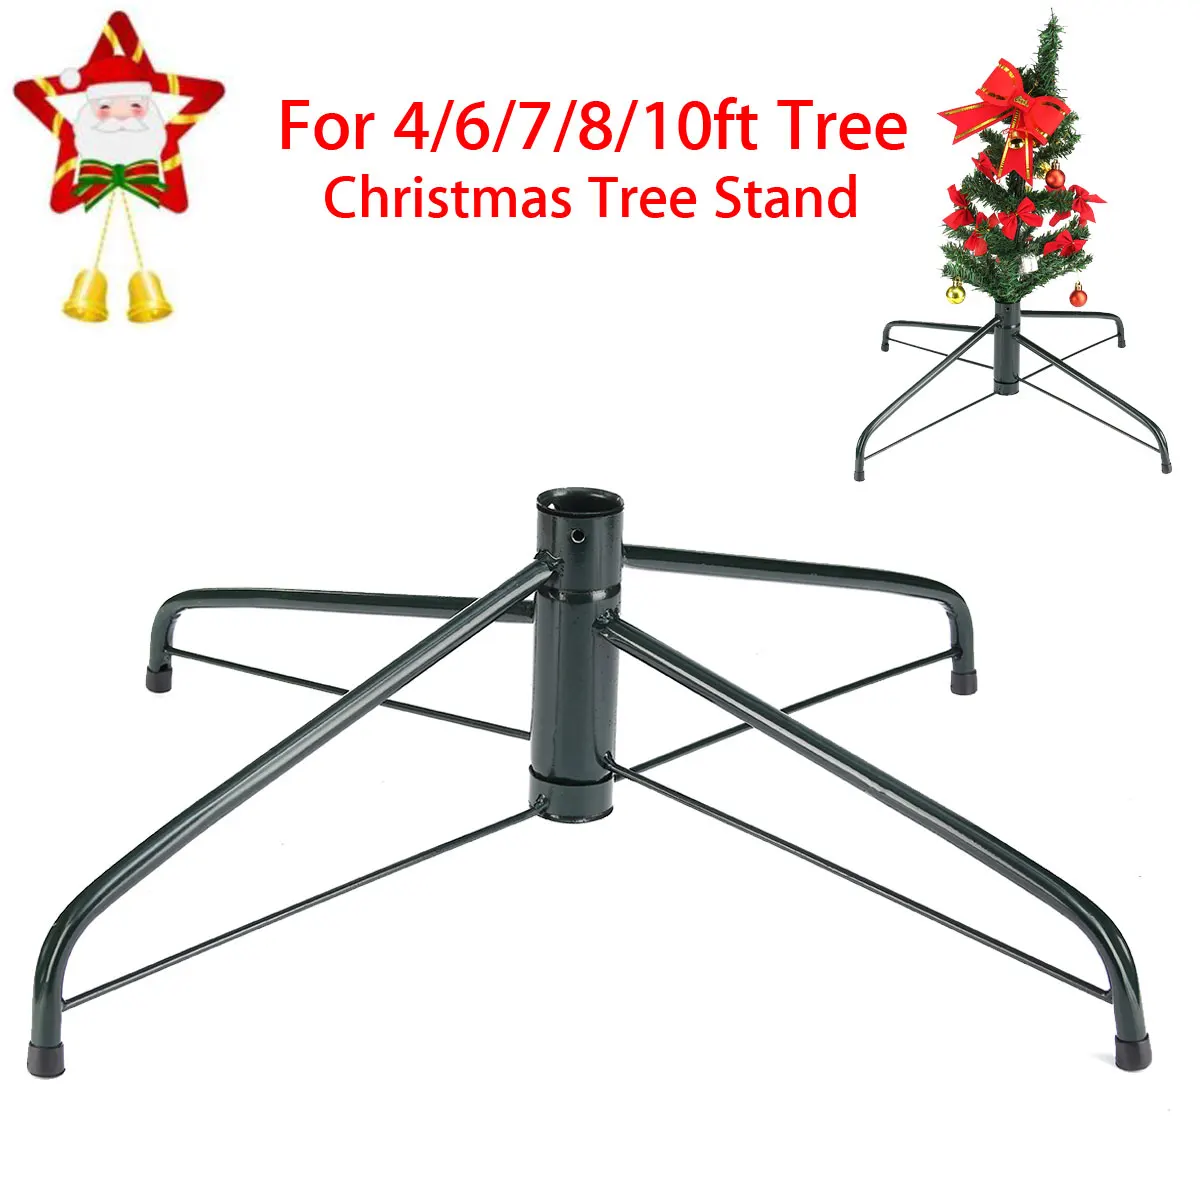 Bigsweety Metal Christmas Tree Stand 4 Foot Base Iron Bracket Rubber Pad Home Party Decoration 